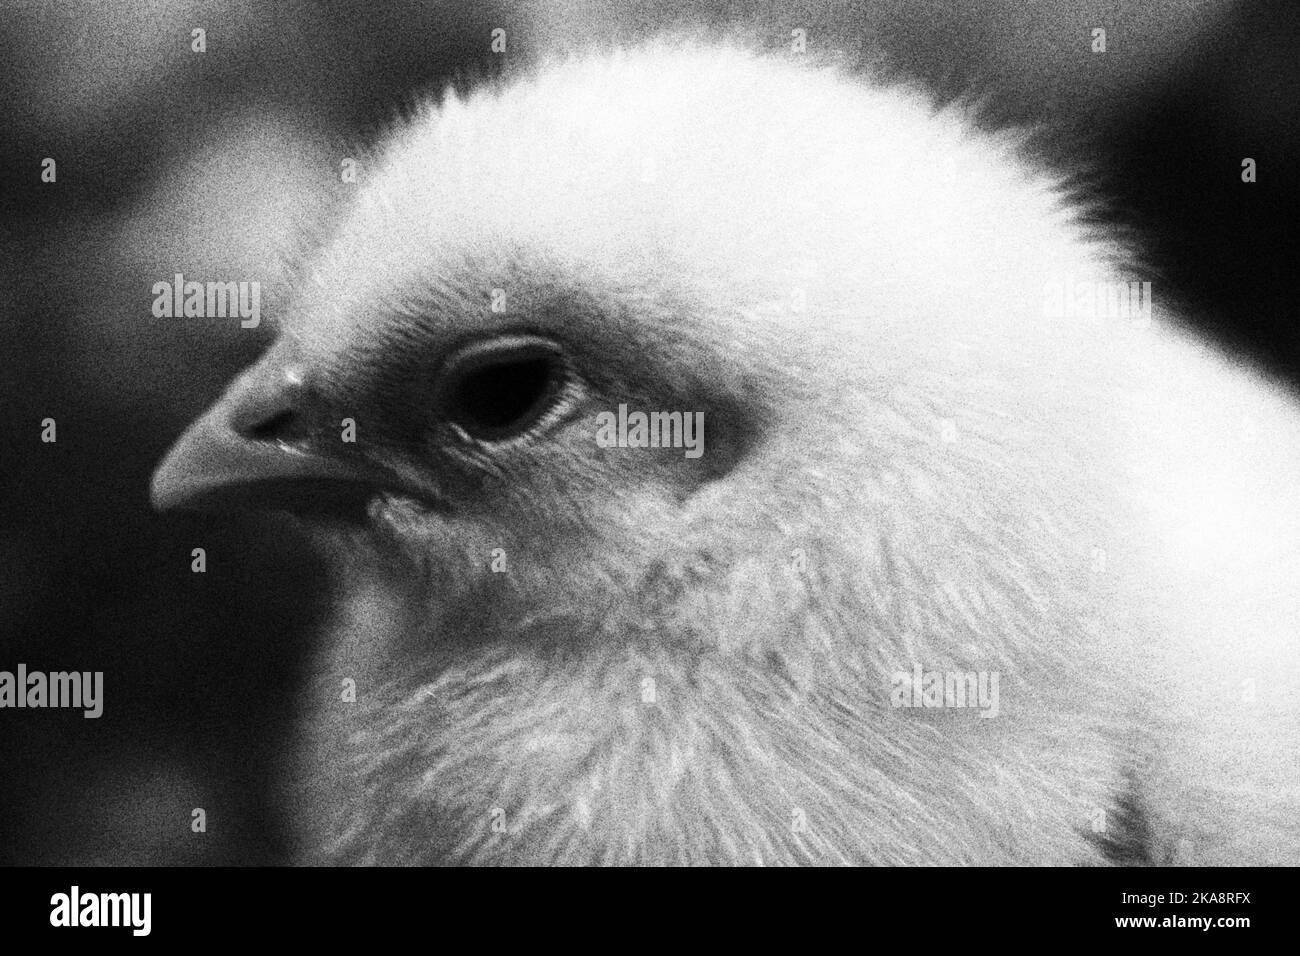 Baby chicken portrait in black and white Stock Photo